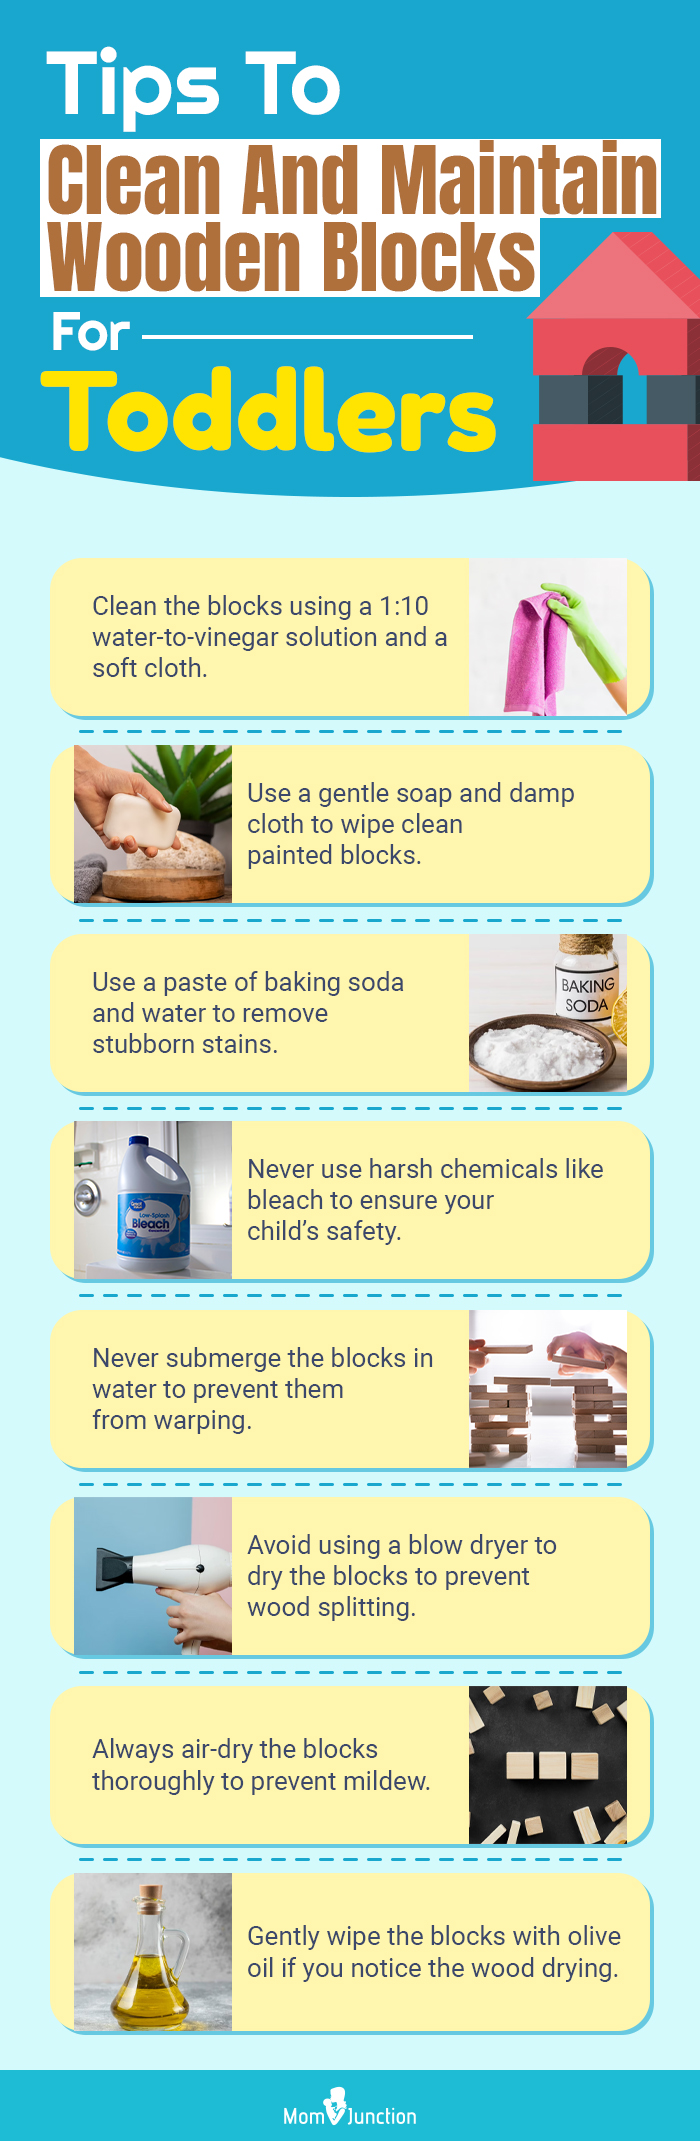 Tips To Clean And Maintain Wooden Blocks For Toddlers (infographic)